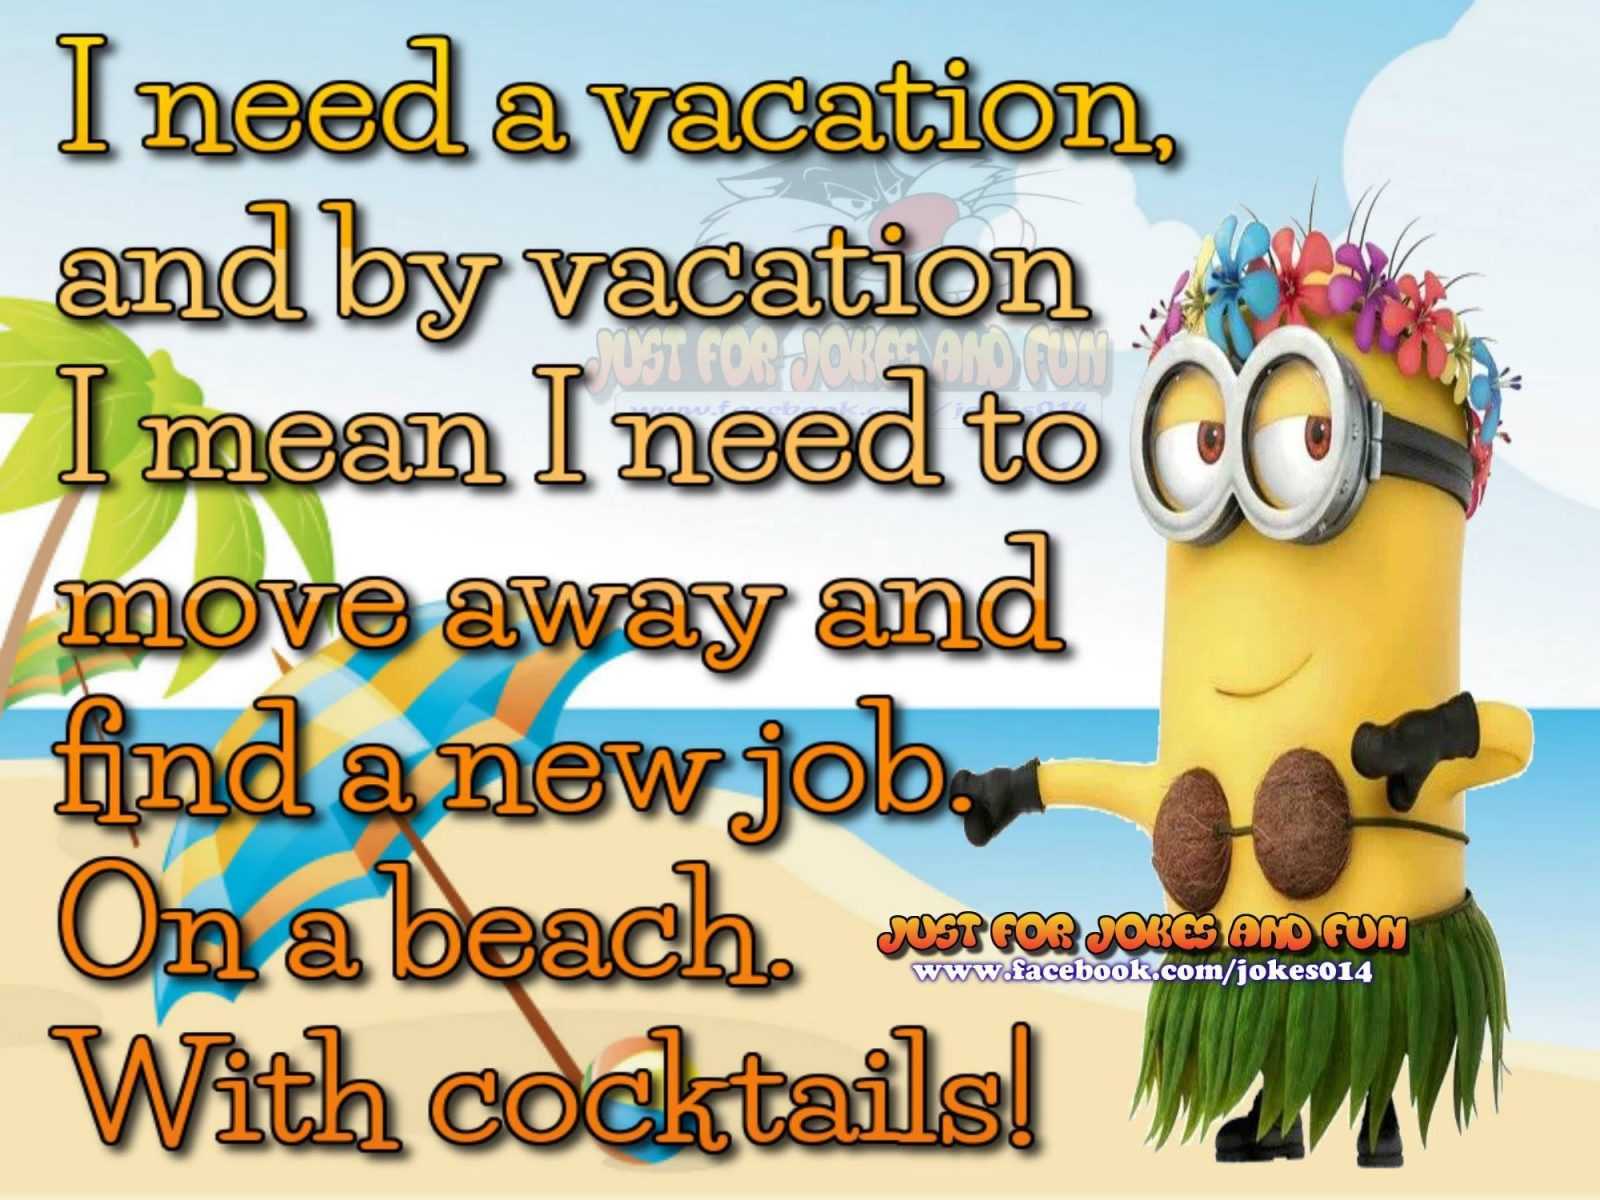 22 New Silly Minion Quotes